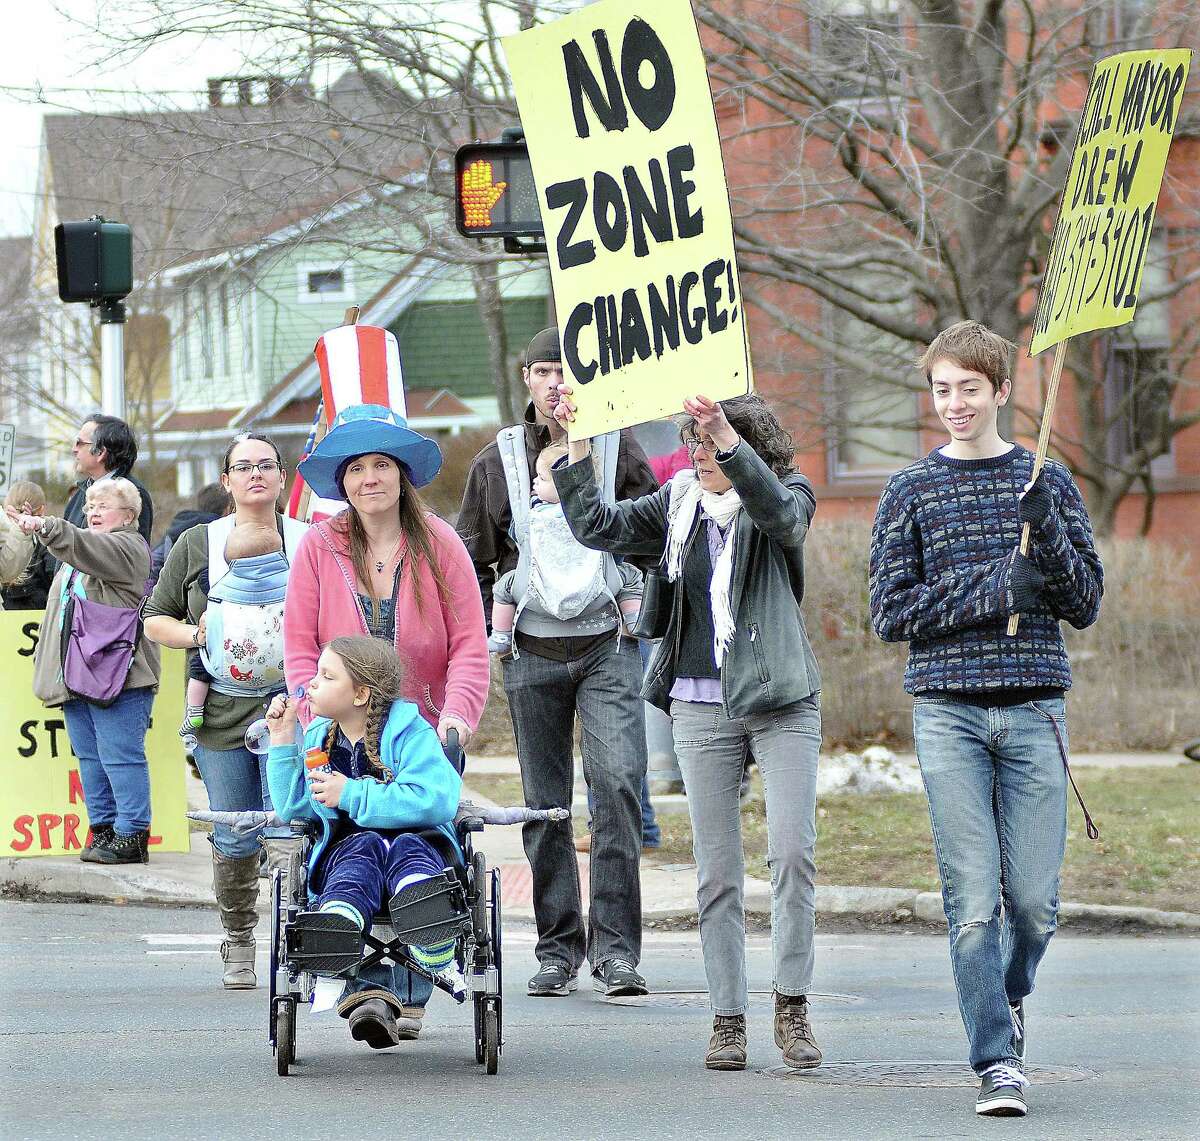 Approximately 40 Middletown residents protested carrying signs at a crosswalk at the intersection of Washington and High streets in the spring of 2013 in response to developer Robert Landino’s proposal to change zoning for a portion of Washington Street in Middletown. (Catherine Avalone/The Middletown Press)